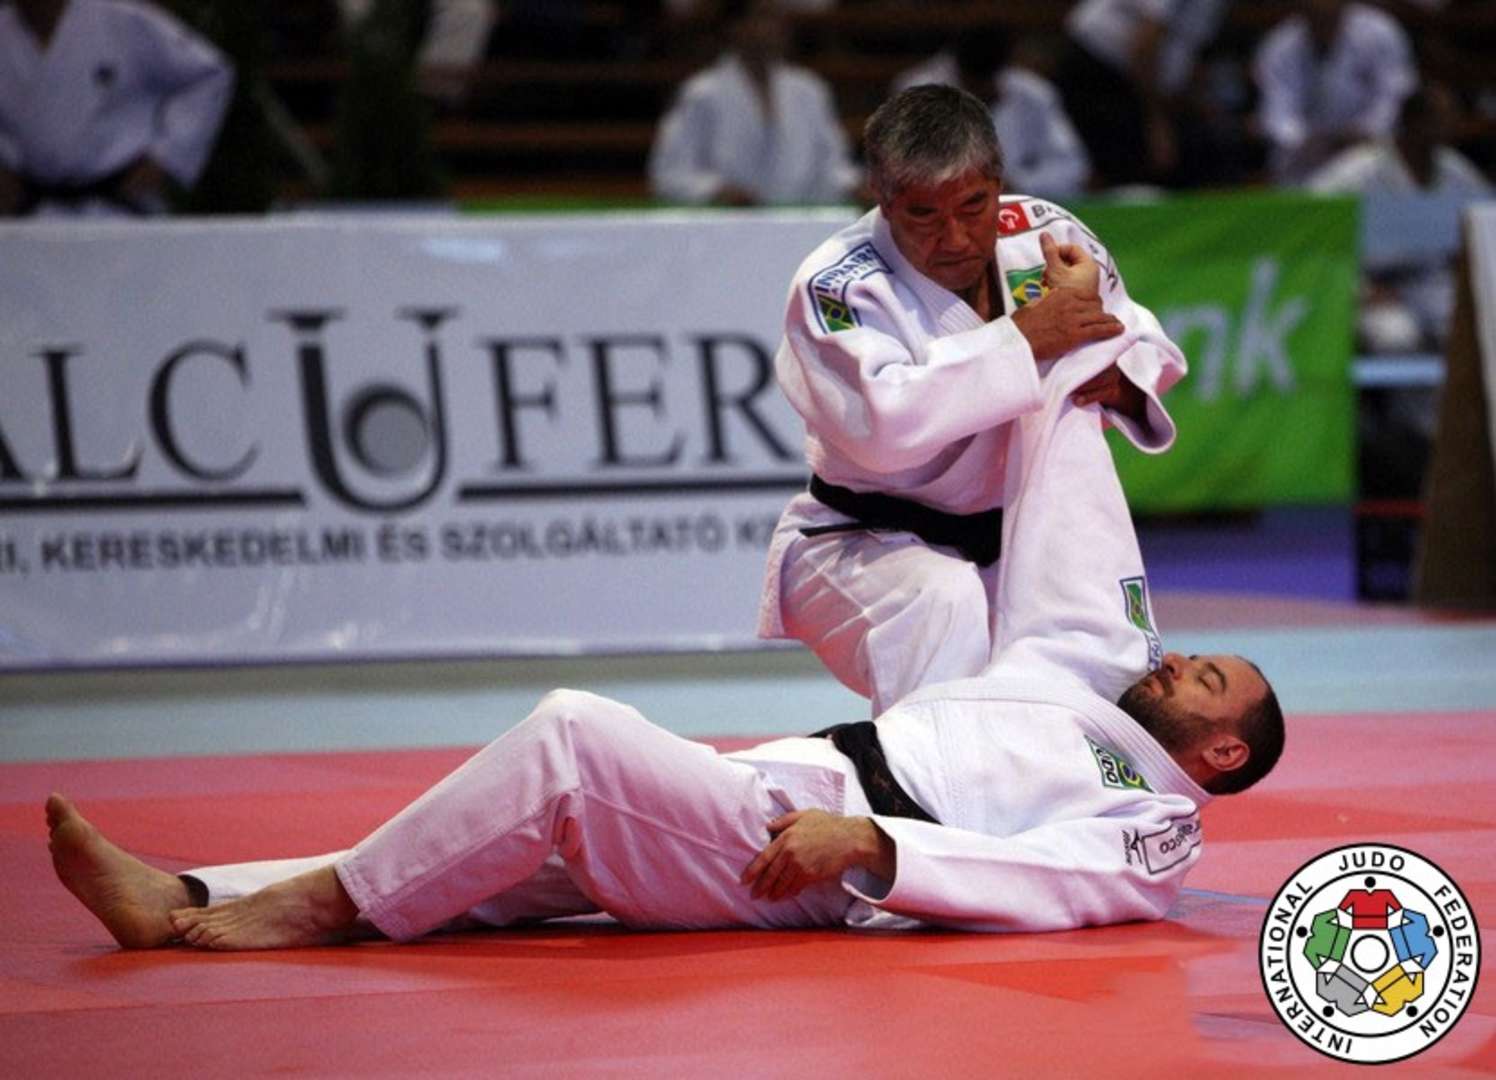 Information about the Kata Commission IJF org